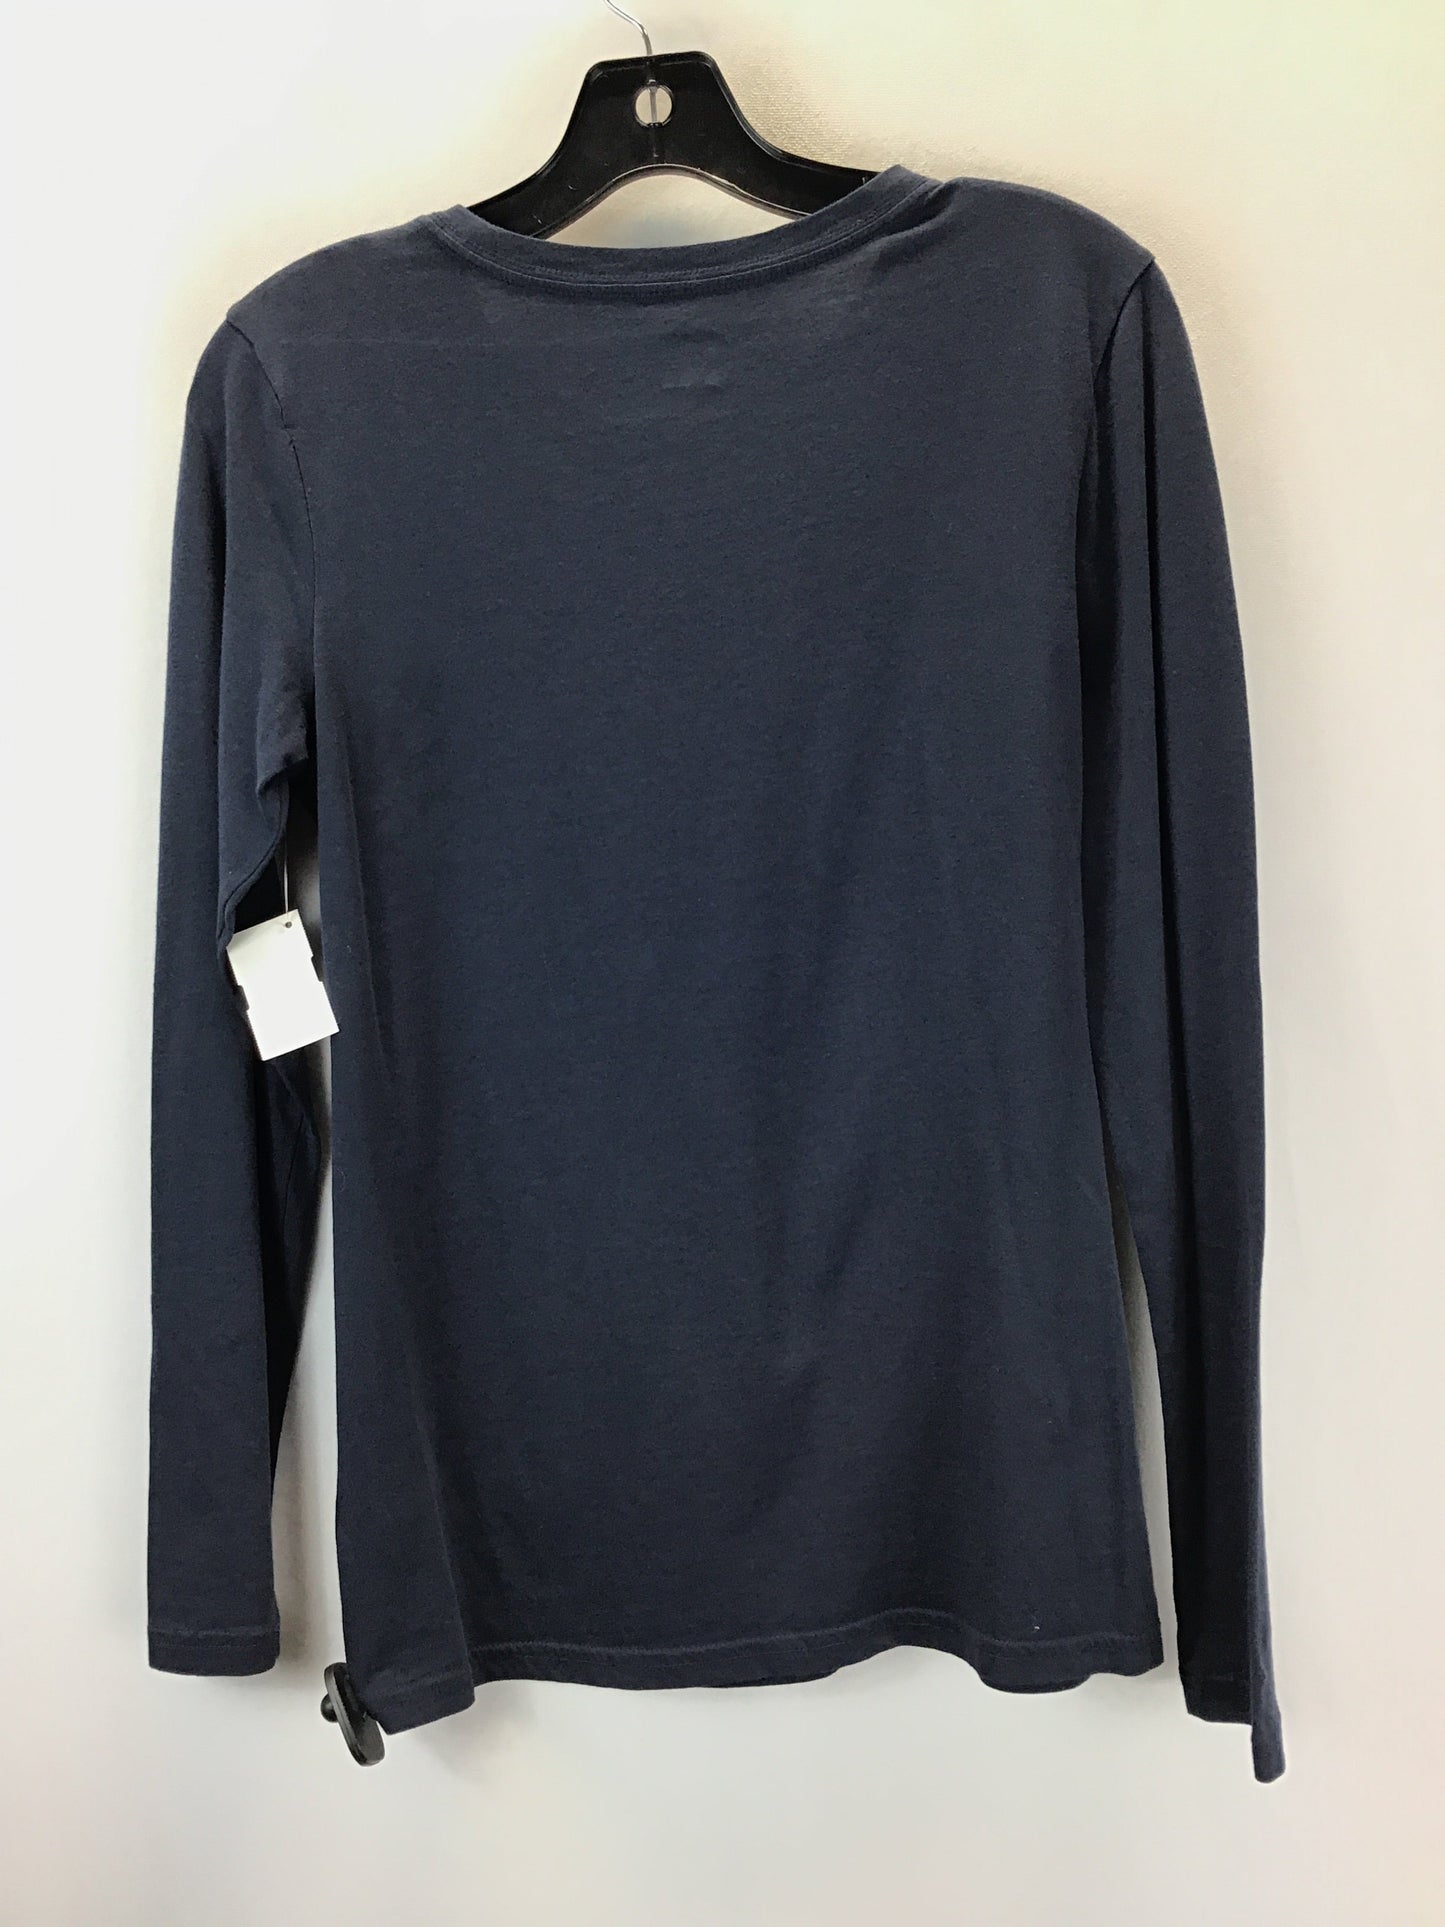 Top Long Sleeve Basic By 14th And Union  Size: M